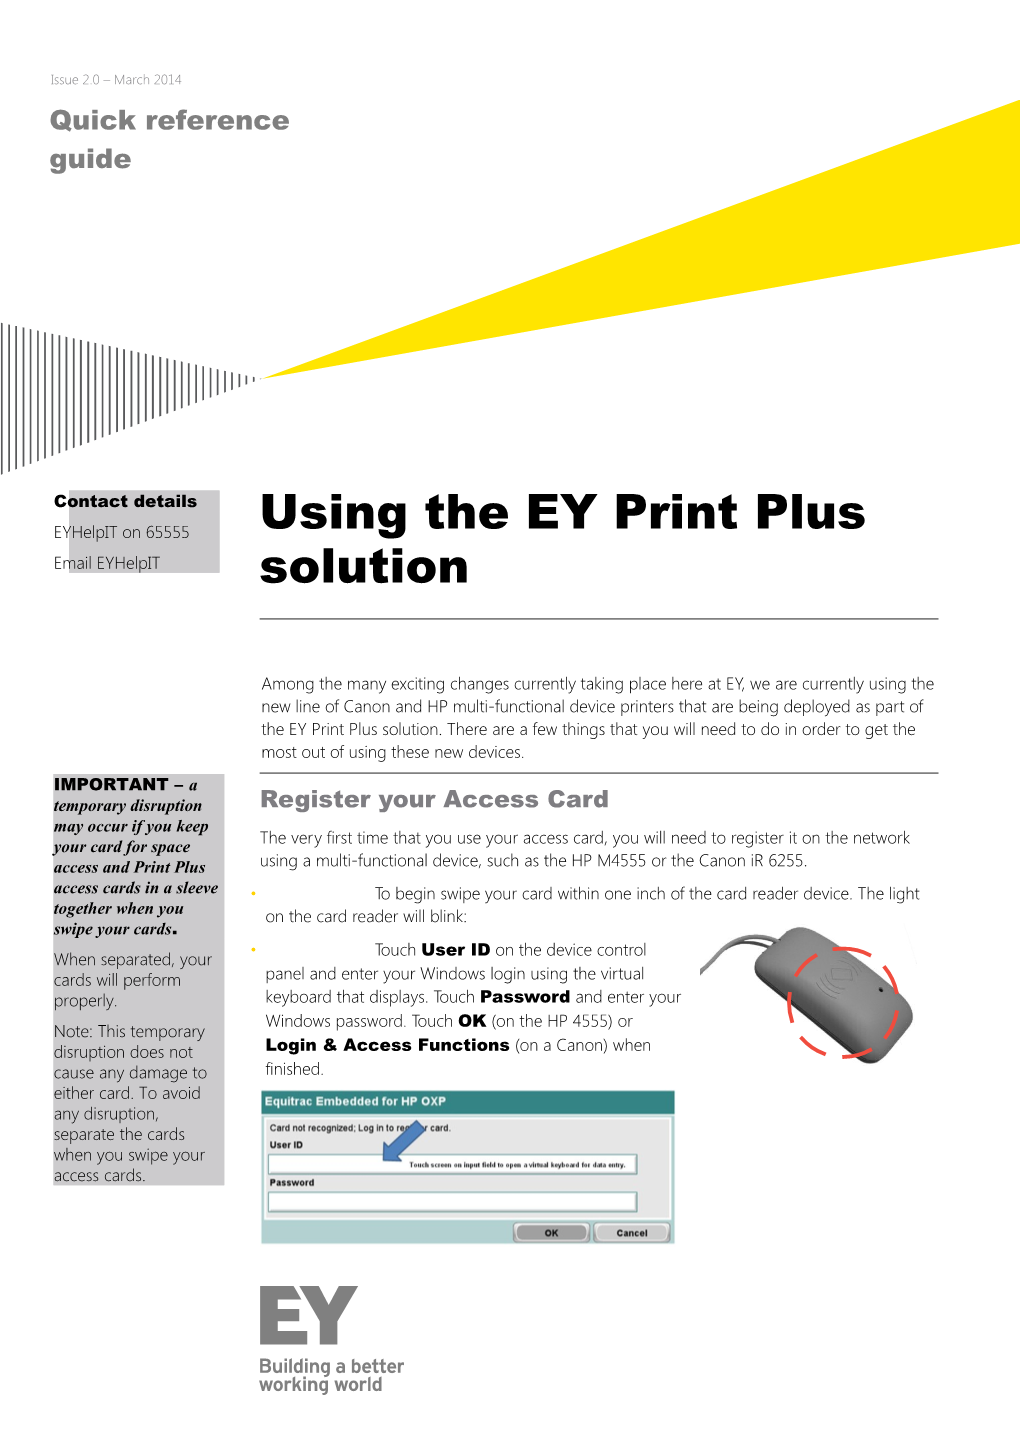 Using the EY Print Plus Solution